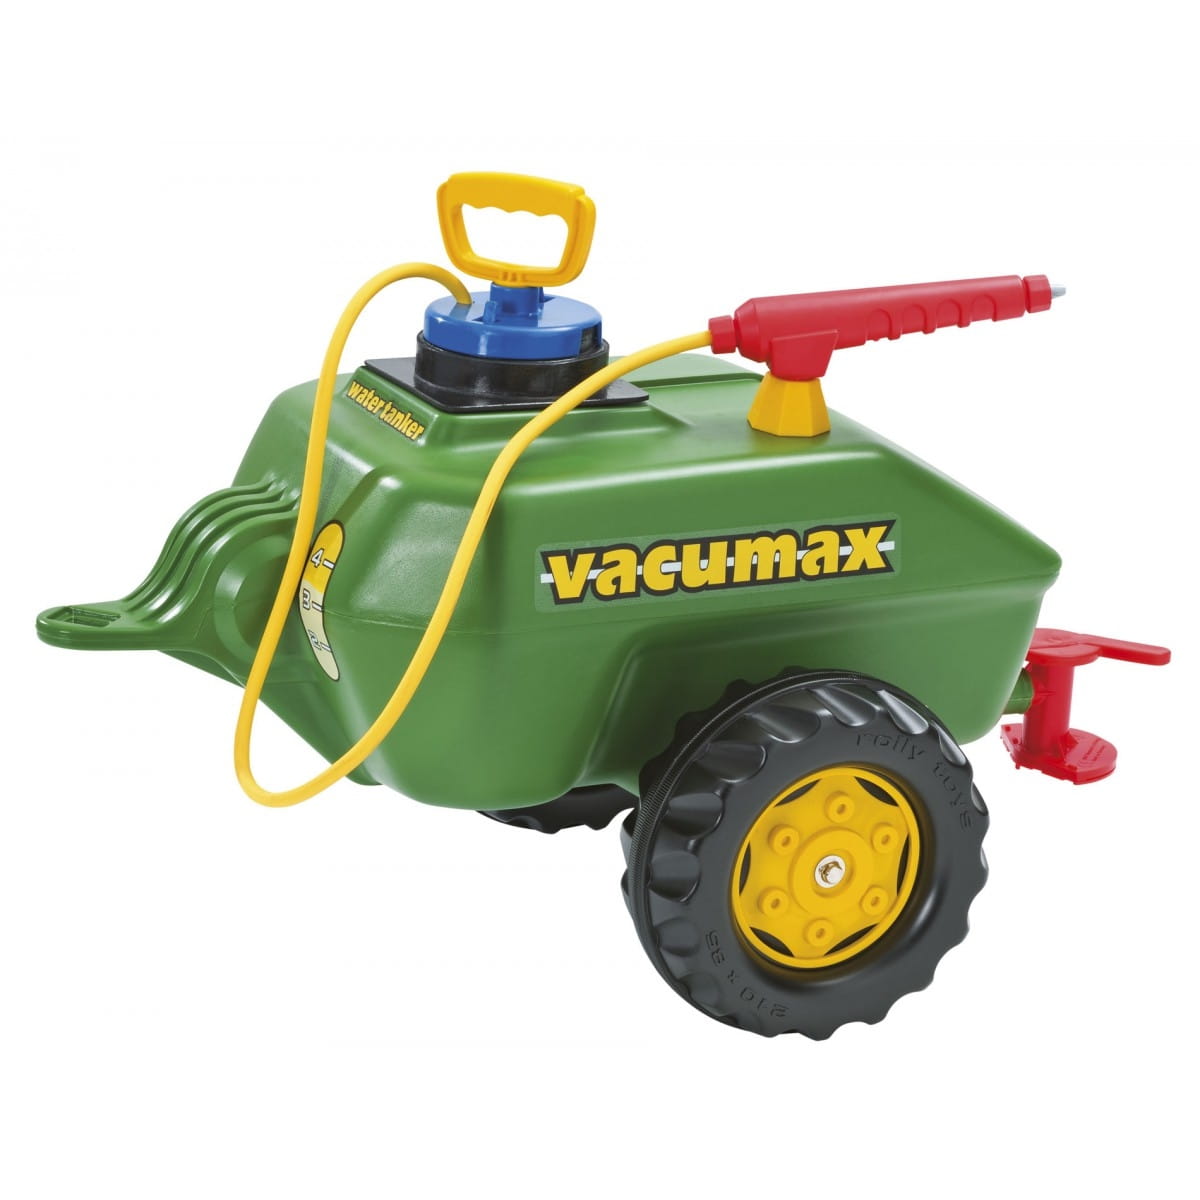        Rolly Toys rollyWater Tanker - 